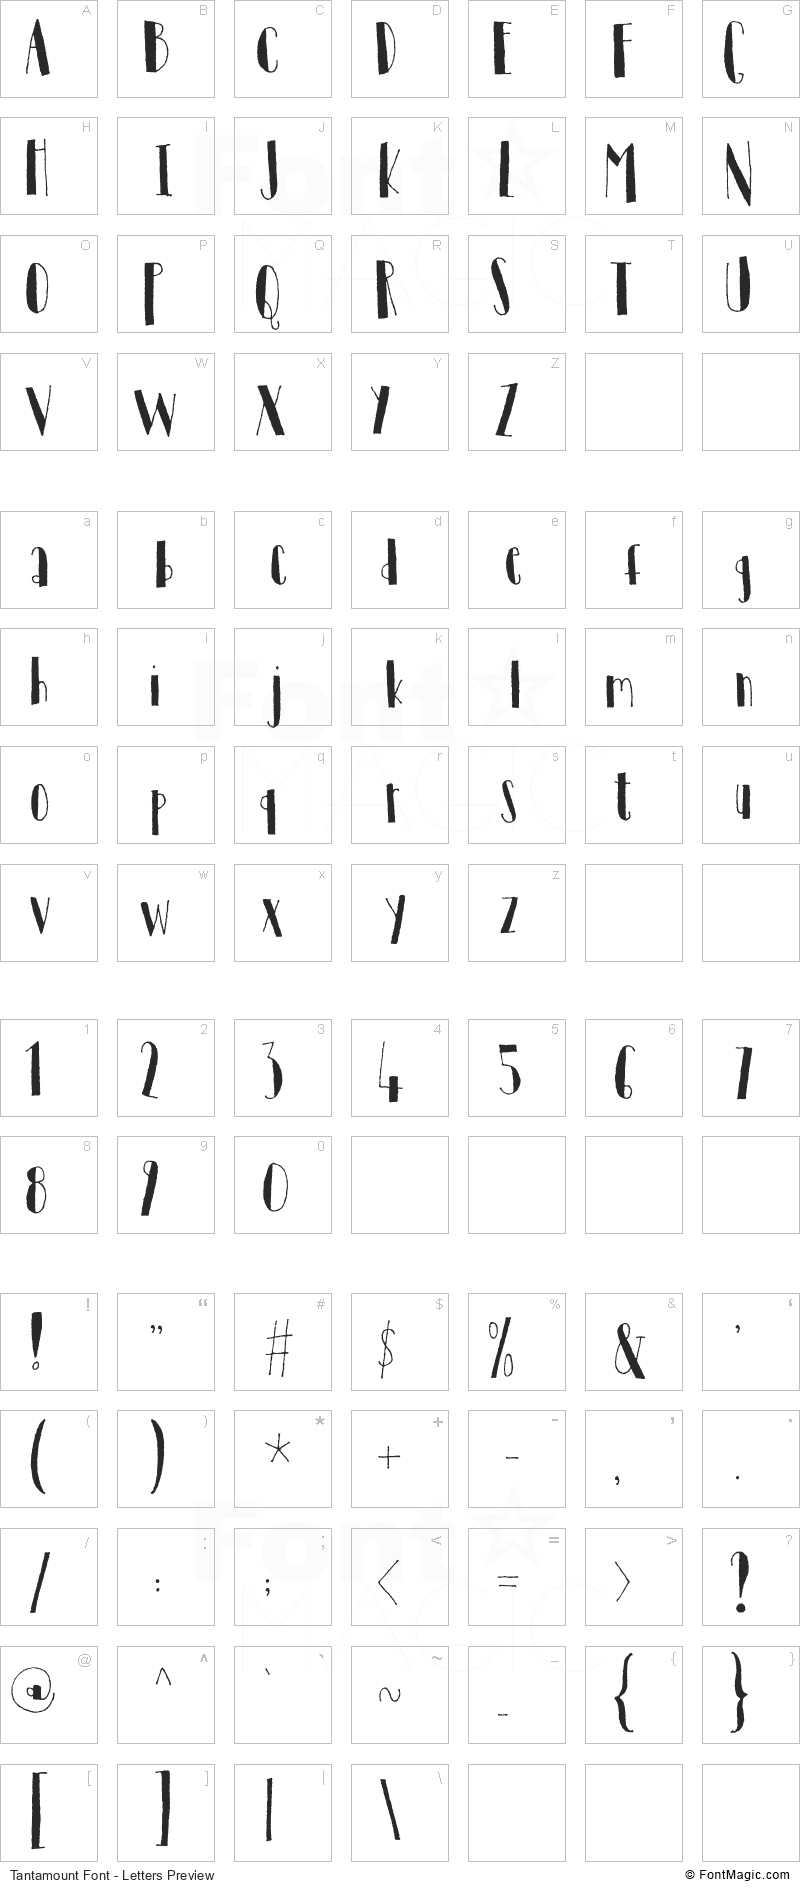 Tantamount Font - All Latters Preview Chart